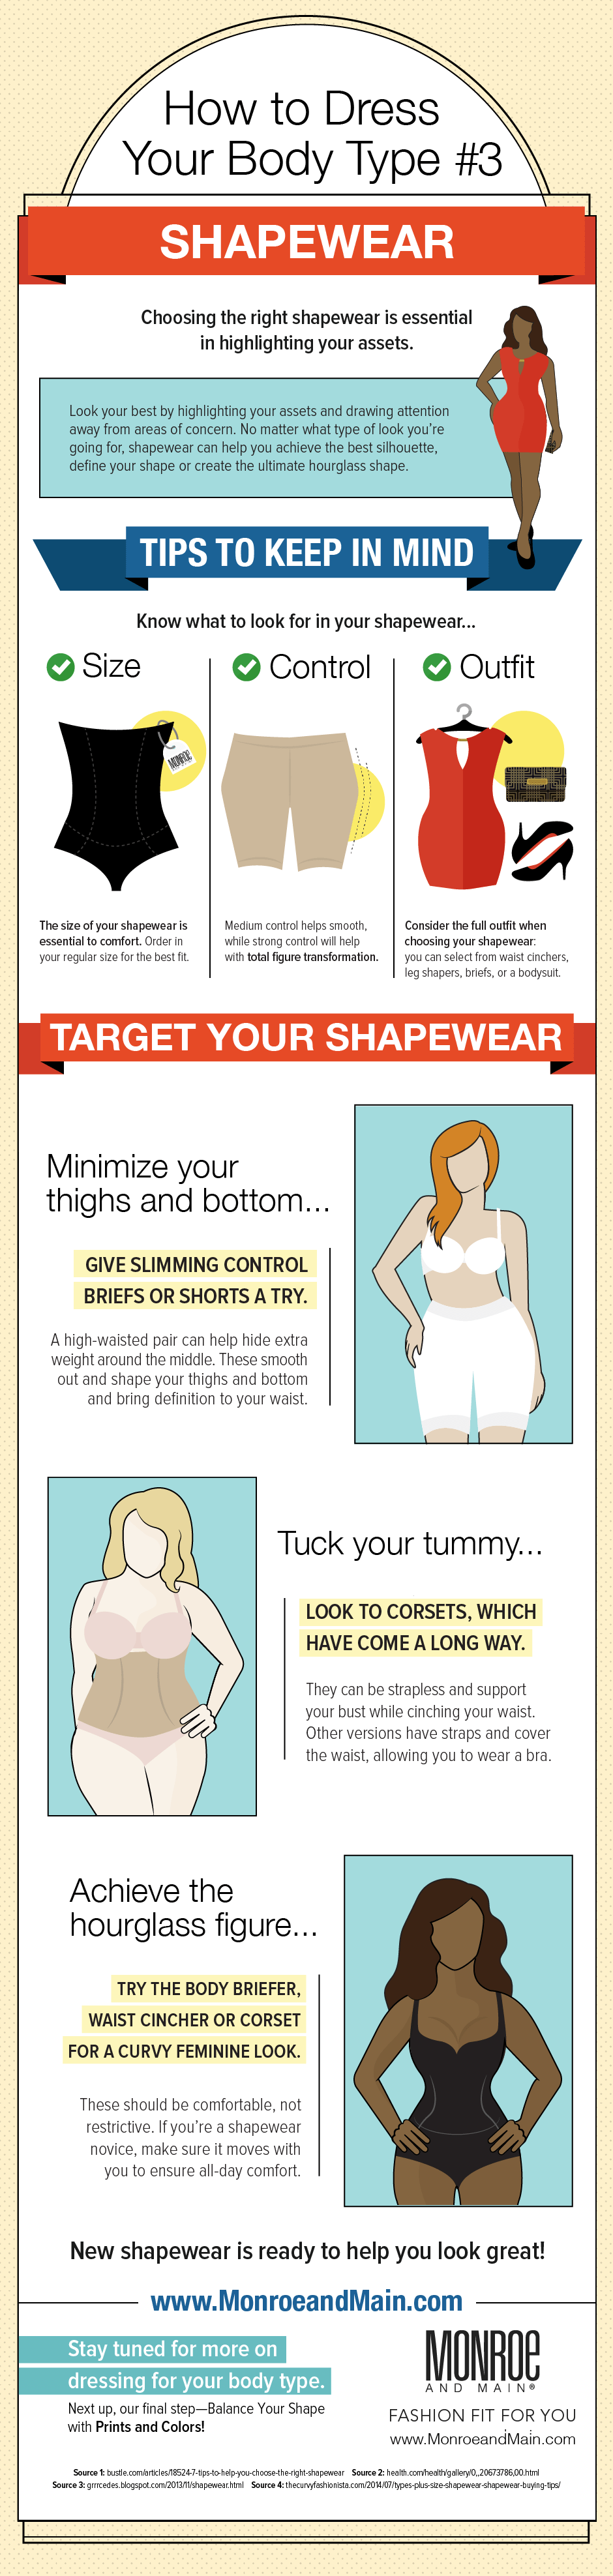 Shapewear Guide: Choosing the Right Shapewear for Your Body Type